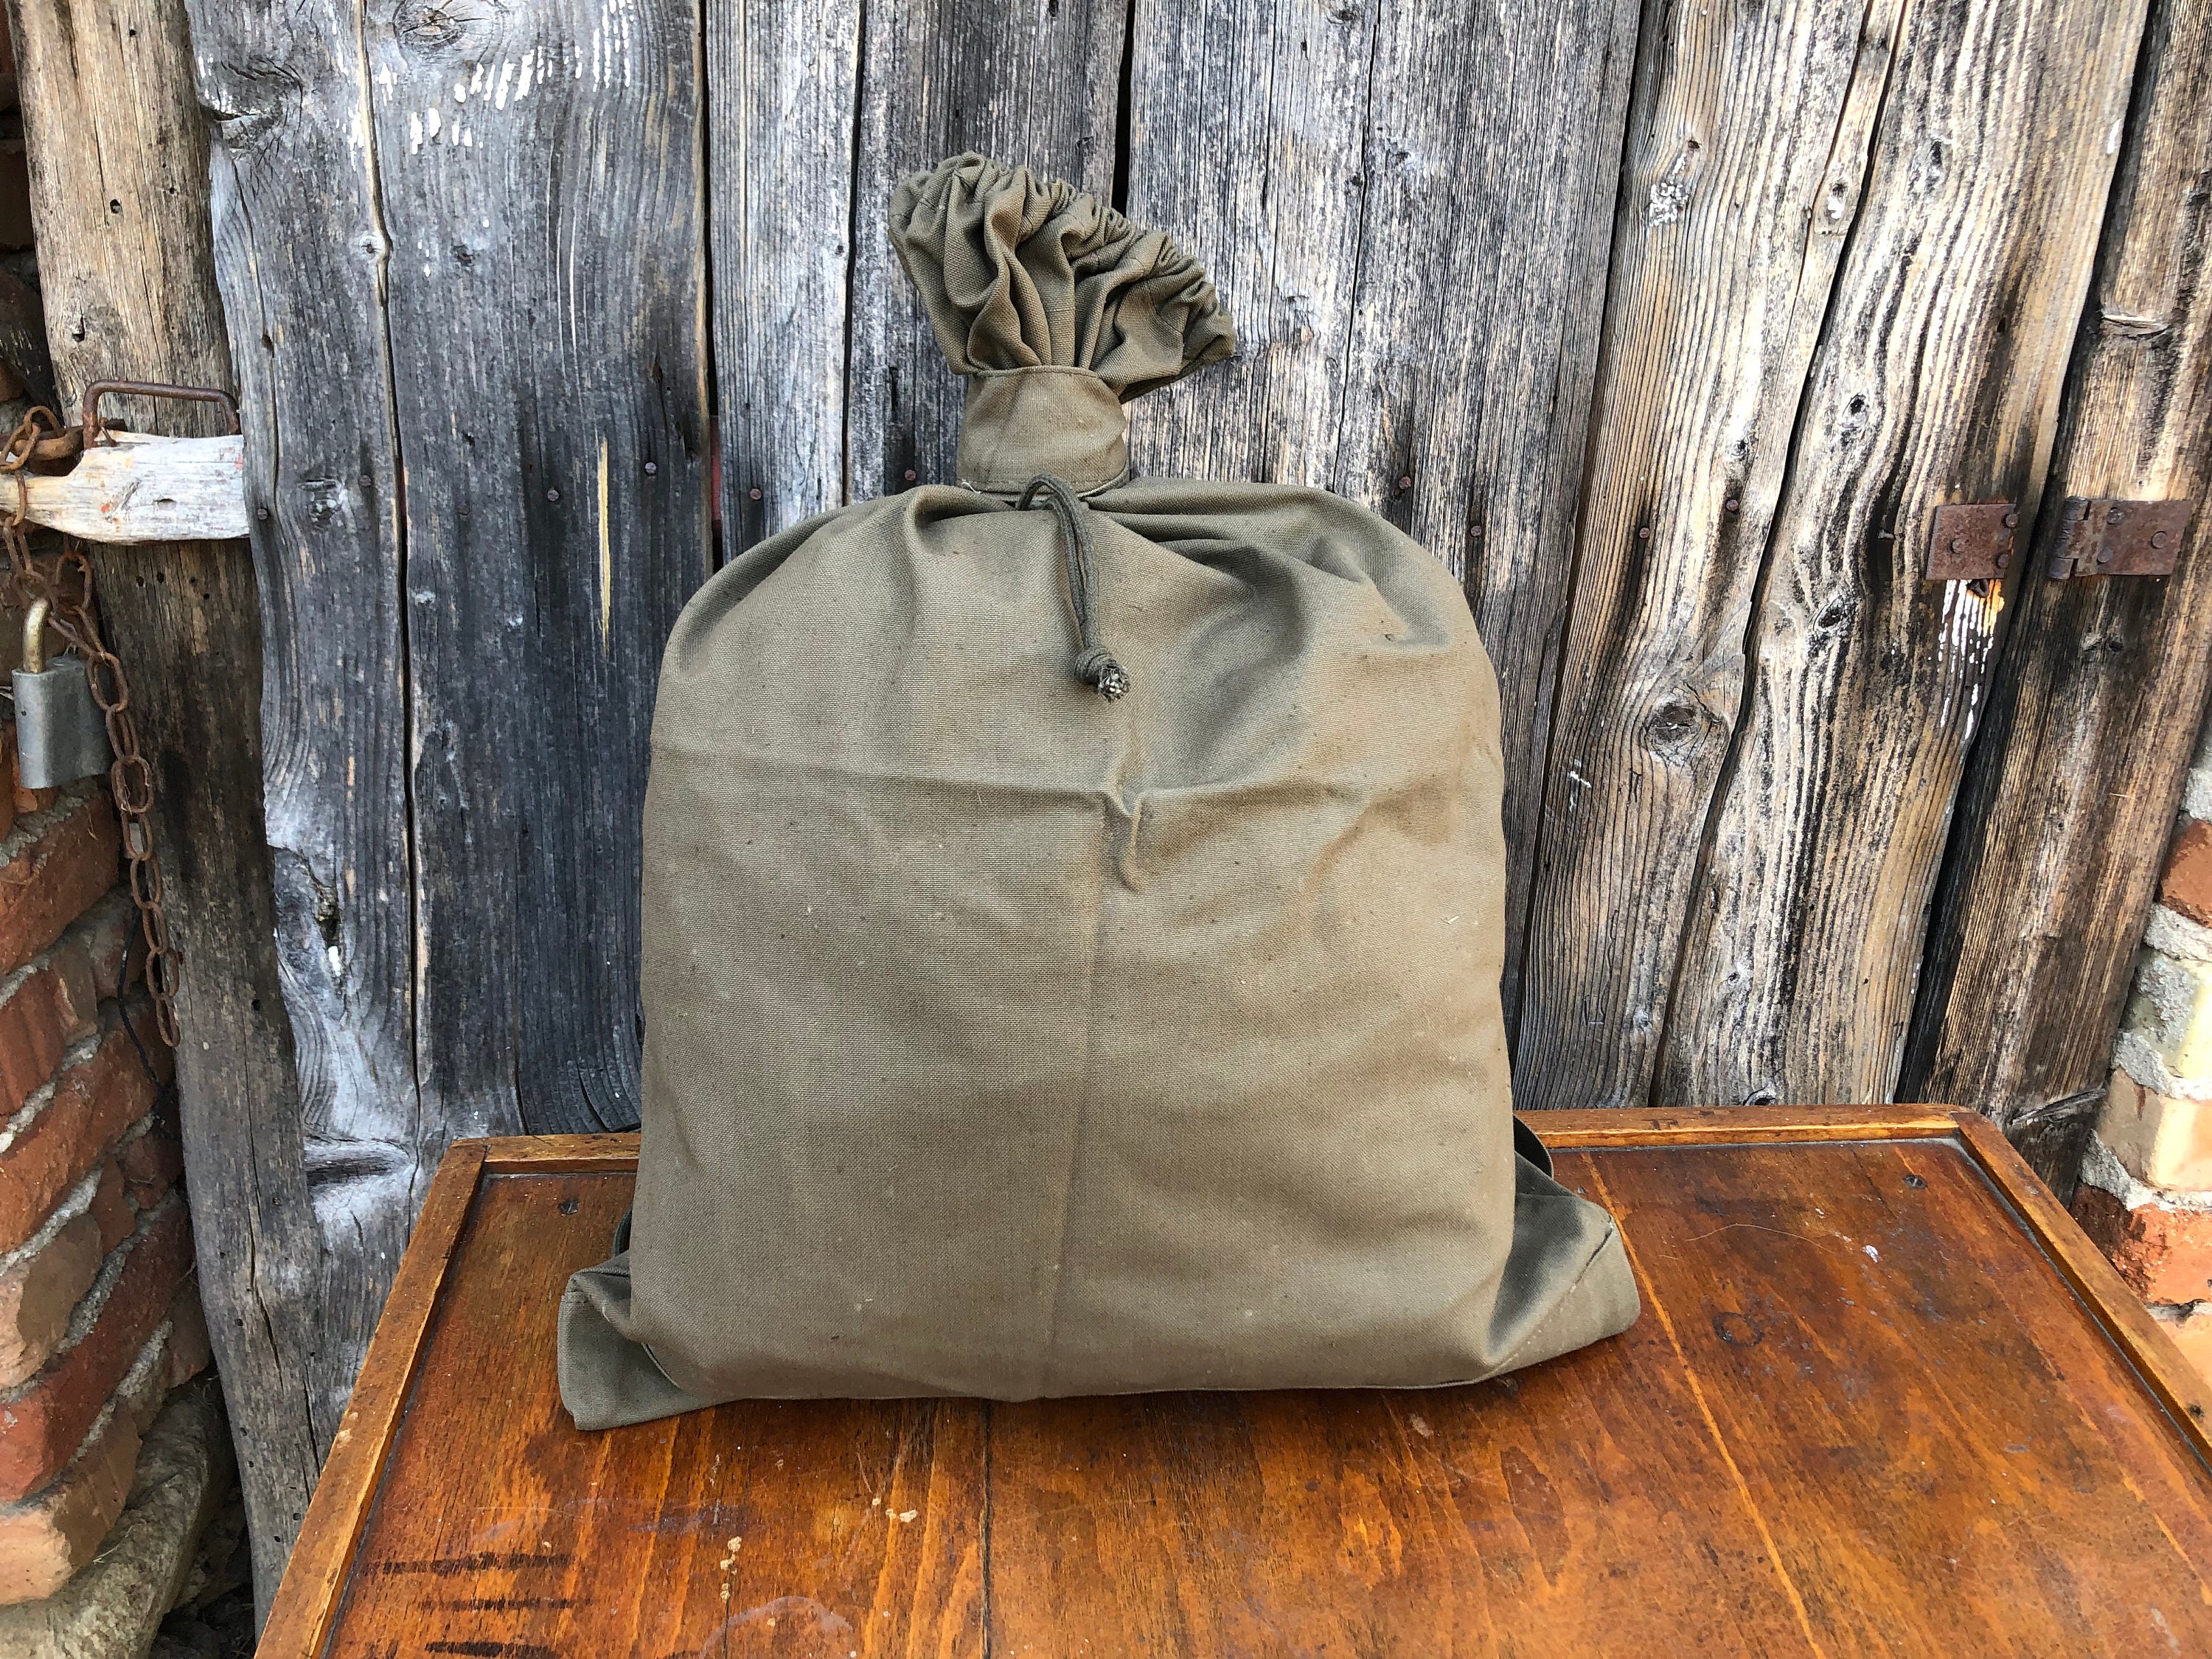 Military Canvas Bag Distressed Canvas Leather Military Bag 